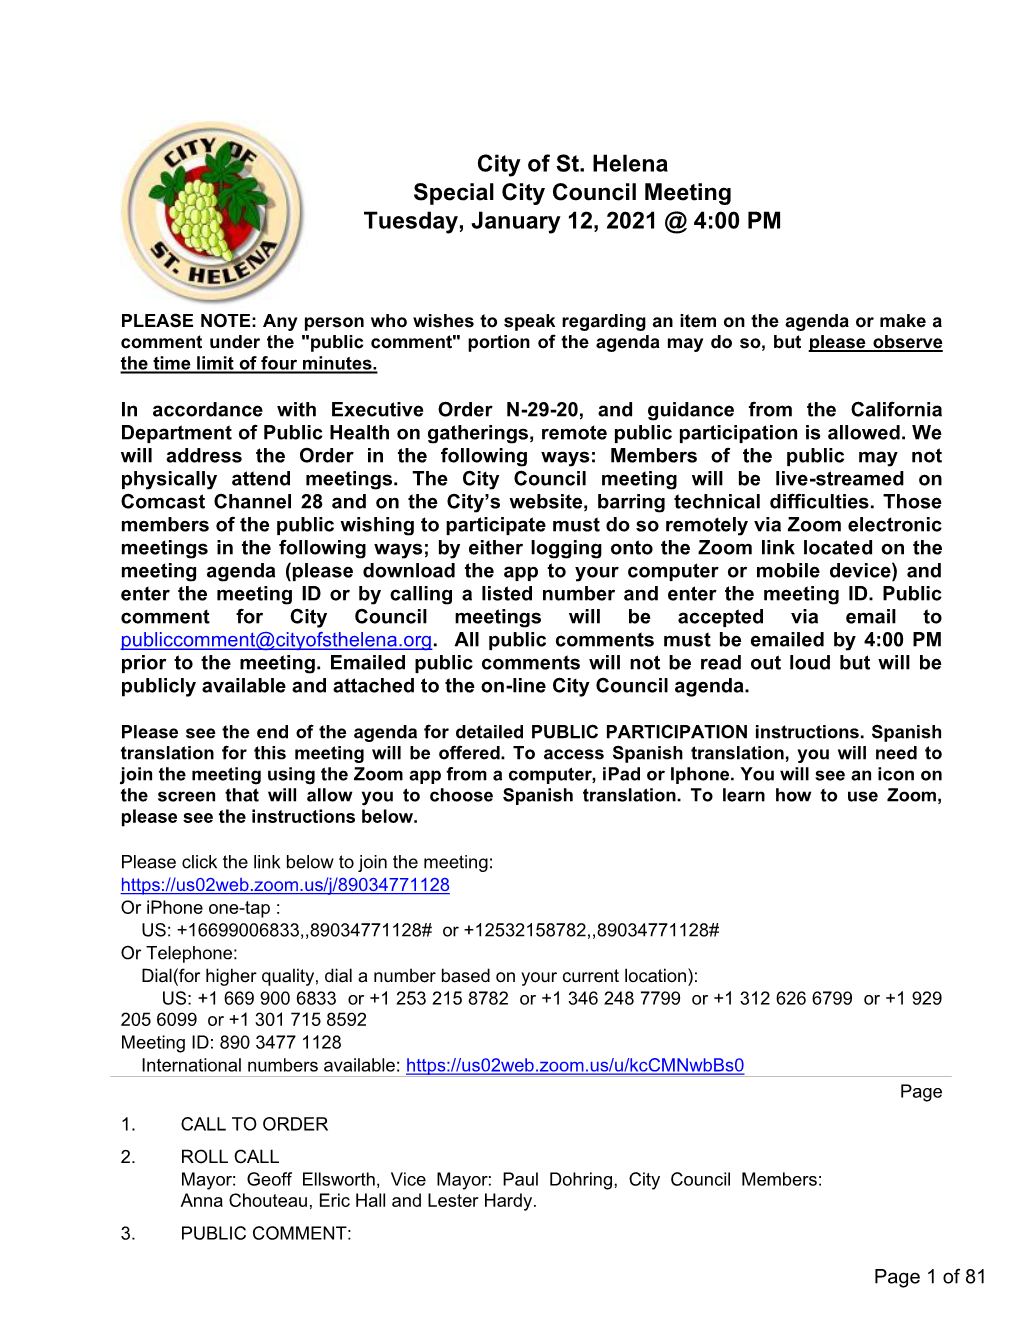 Special City Council Meeting Tuesday, January 12, 2021 @ 4:00 PM